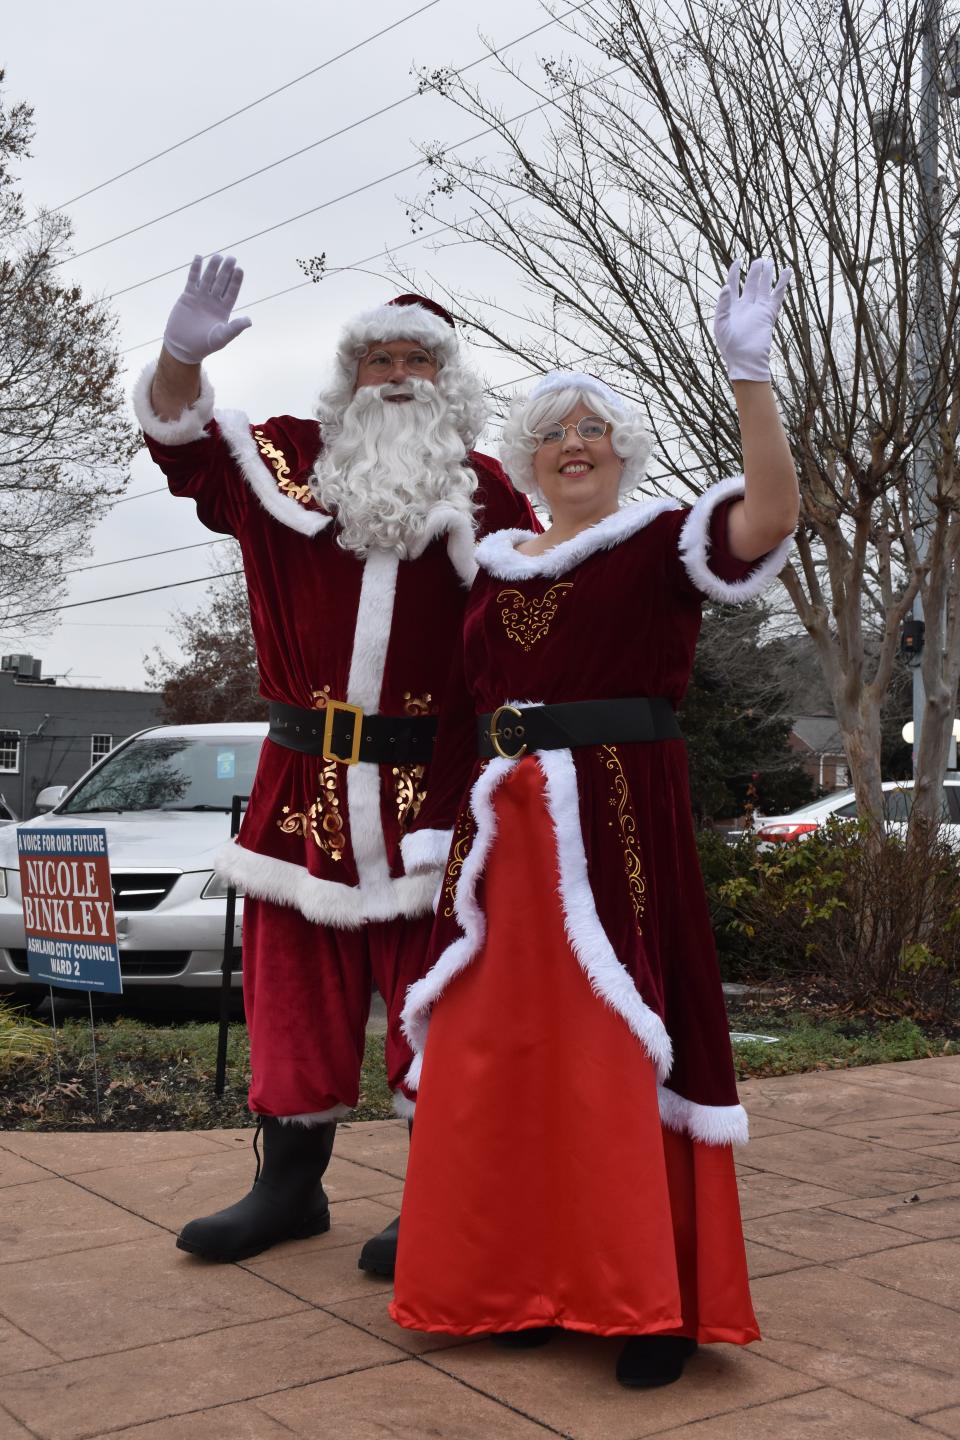 Santa and Mrs. Claus waved to passersby.